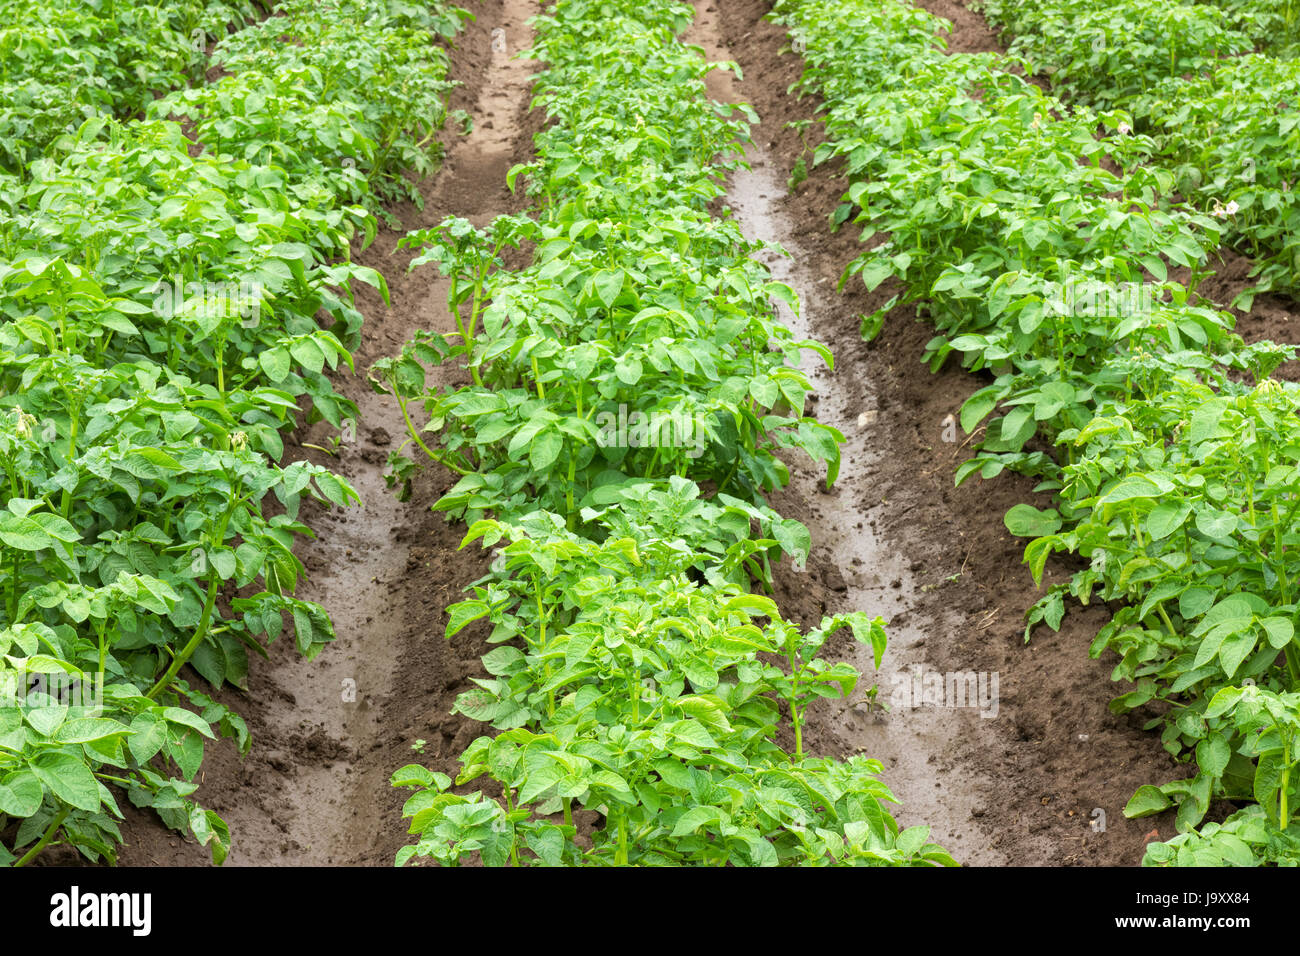 food, aliment, leaf, agriculture, farming, field, root, vegetable, raw, farm, Stock Photo